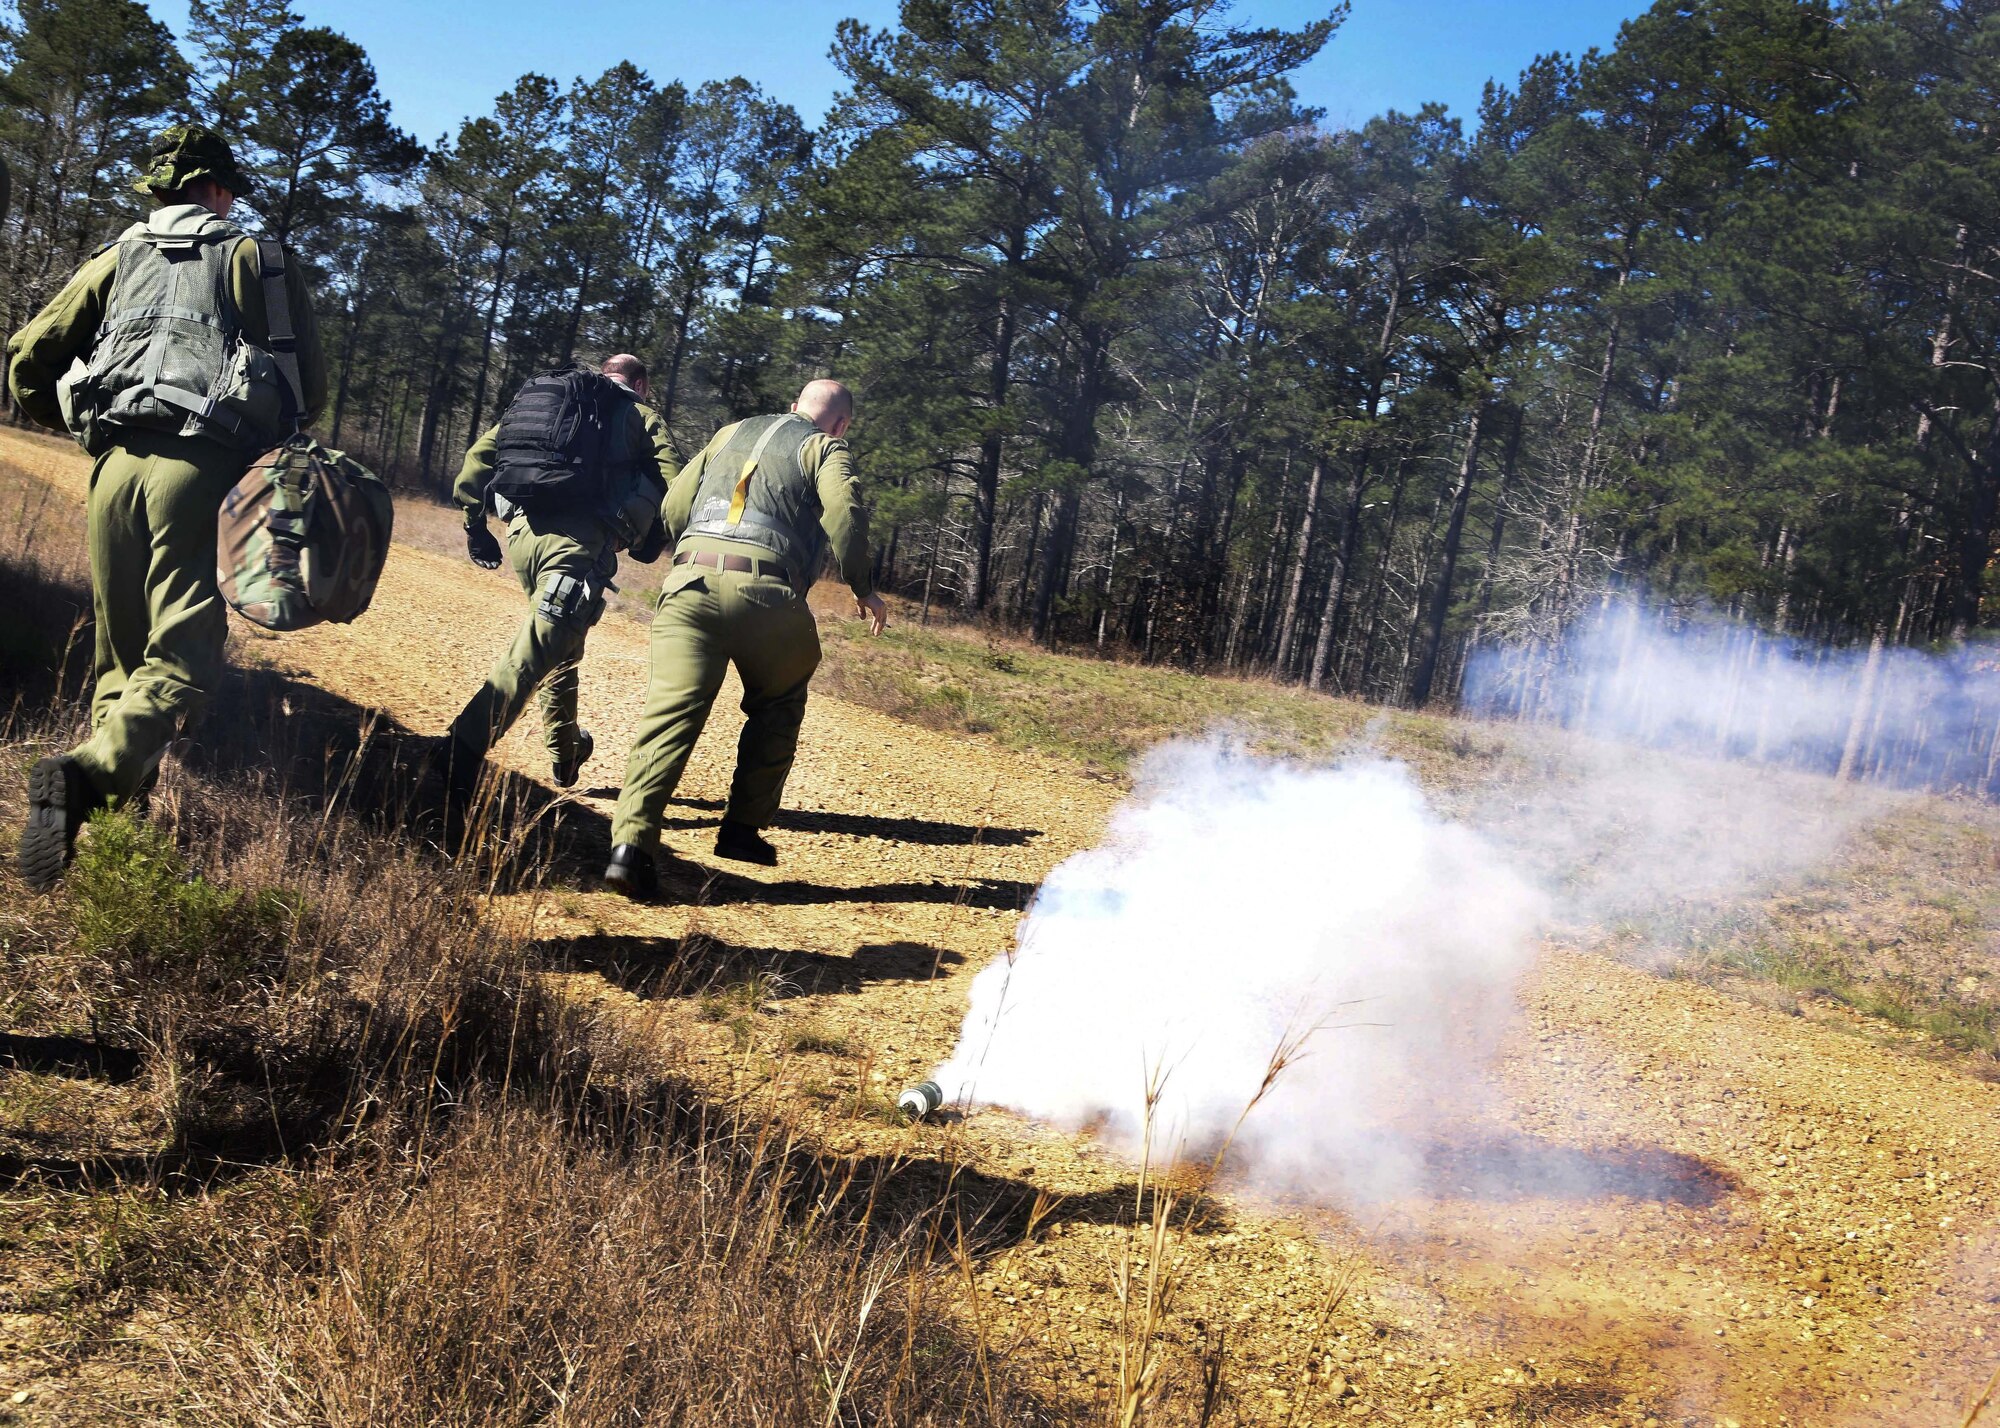 The Royal Canadian Air Force 436 Transport Squadron participate in survival, evasion, resistance and escape training Feb. 10, 2017, near Alexandria, La. Aircrew members must be able to survive on their own in any environment under any condition in the event their aircraft goes down. (U.S. Air Force photo by Senior Airman Stephanie Serrano)